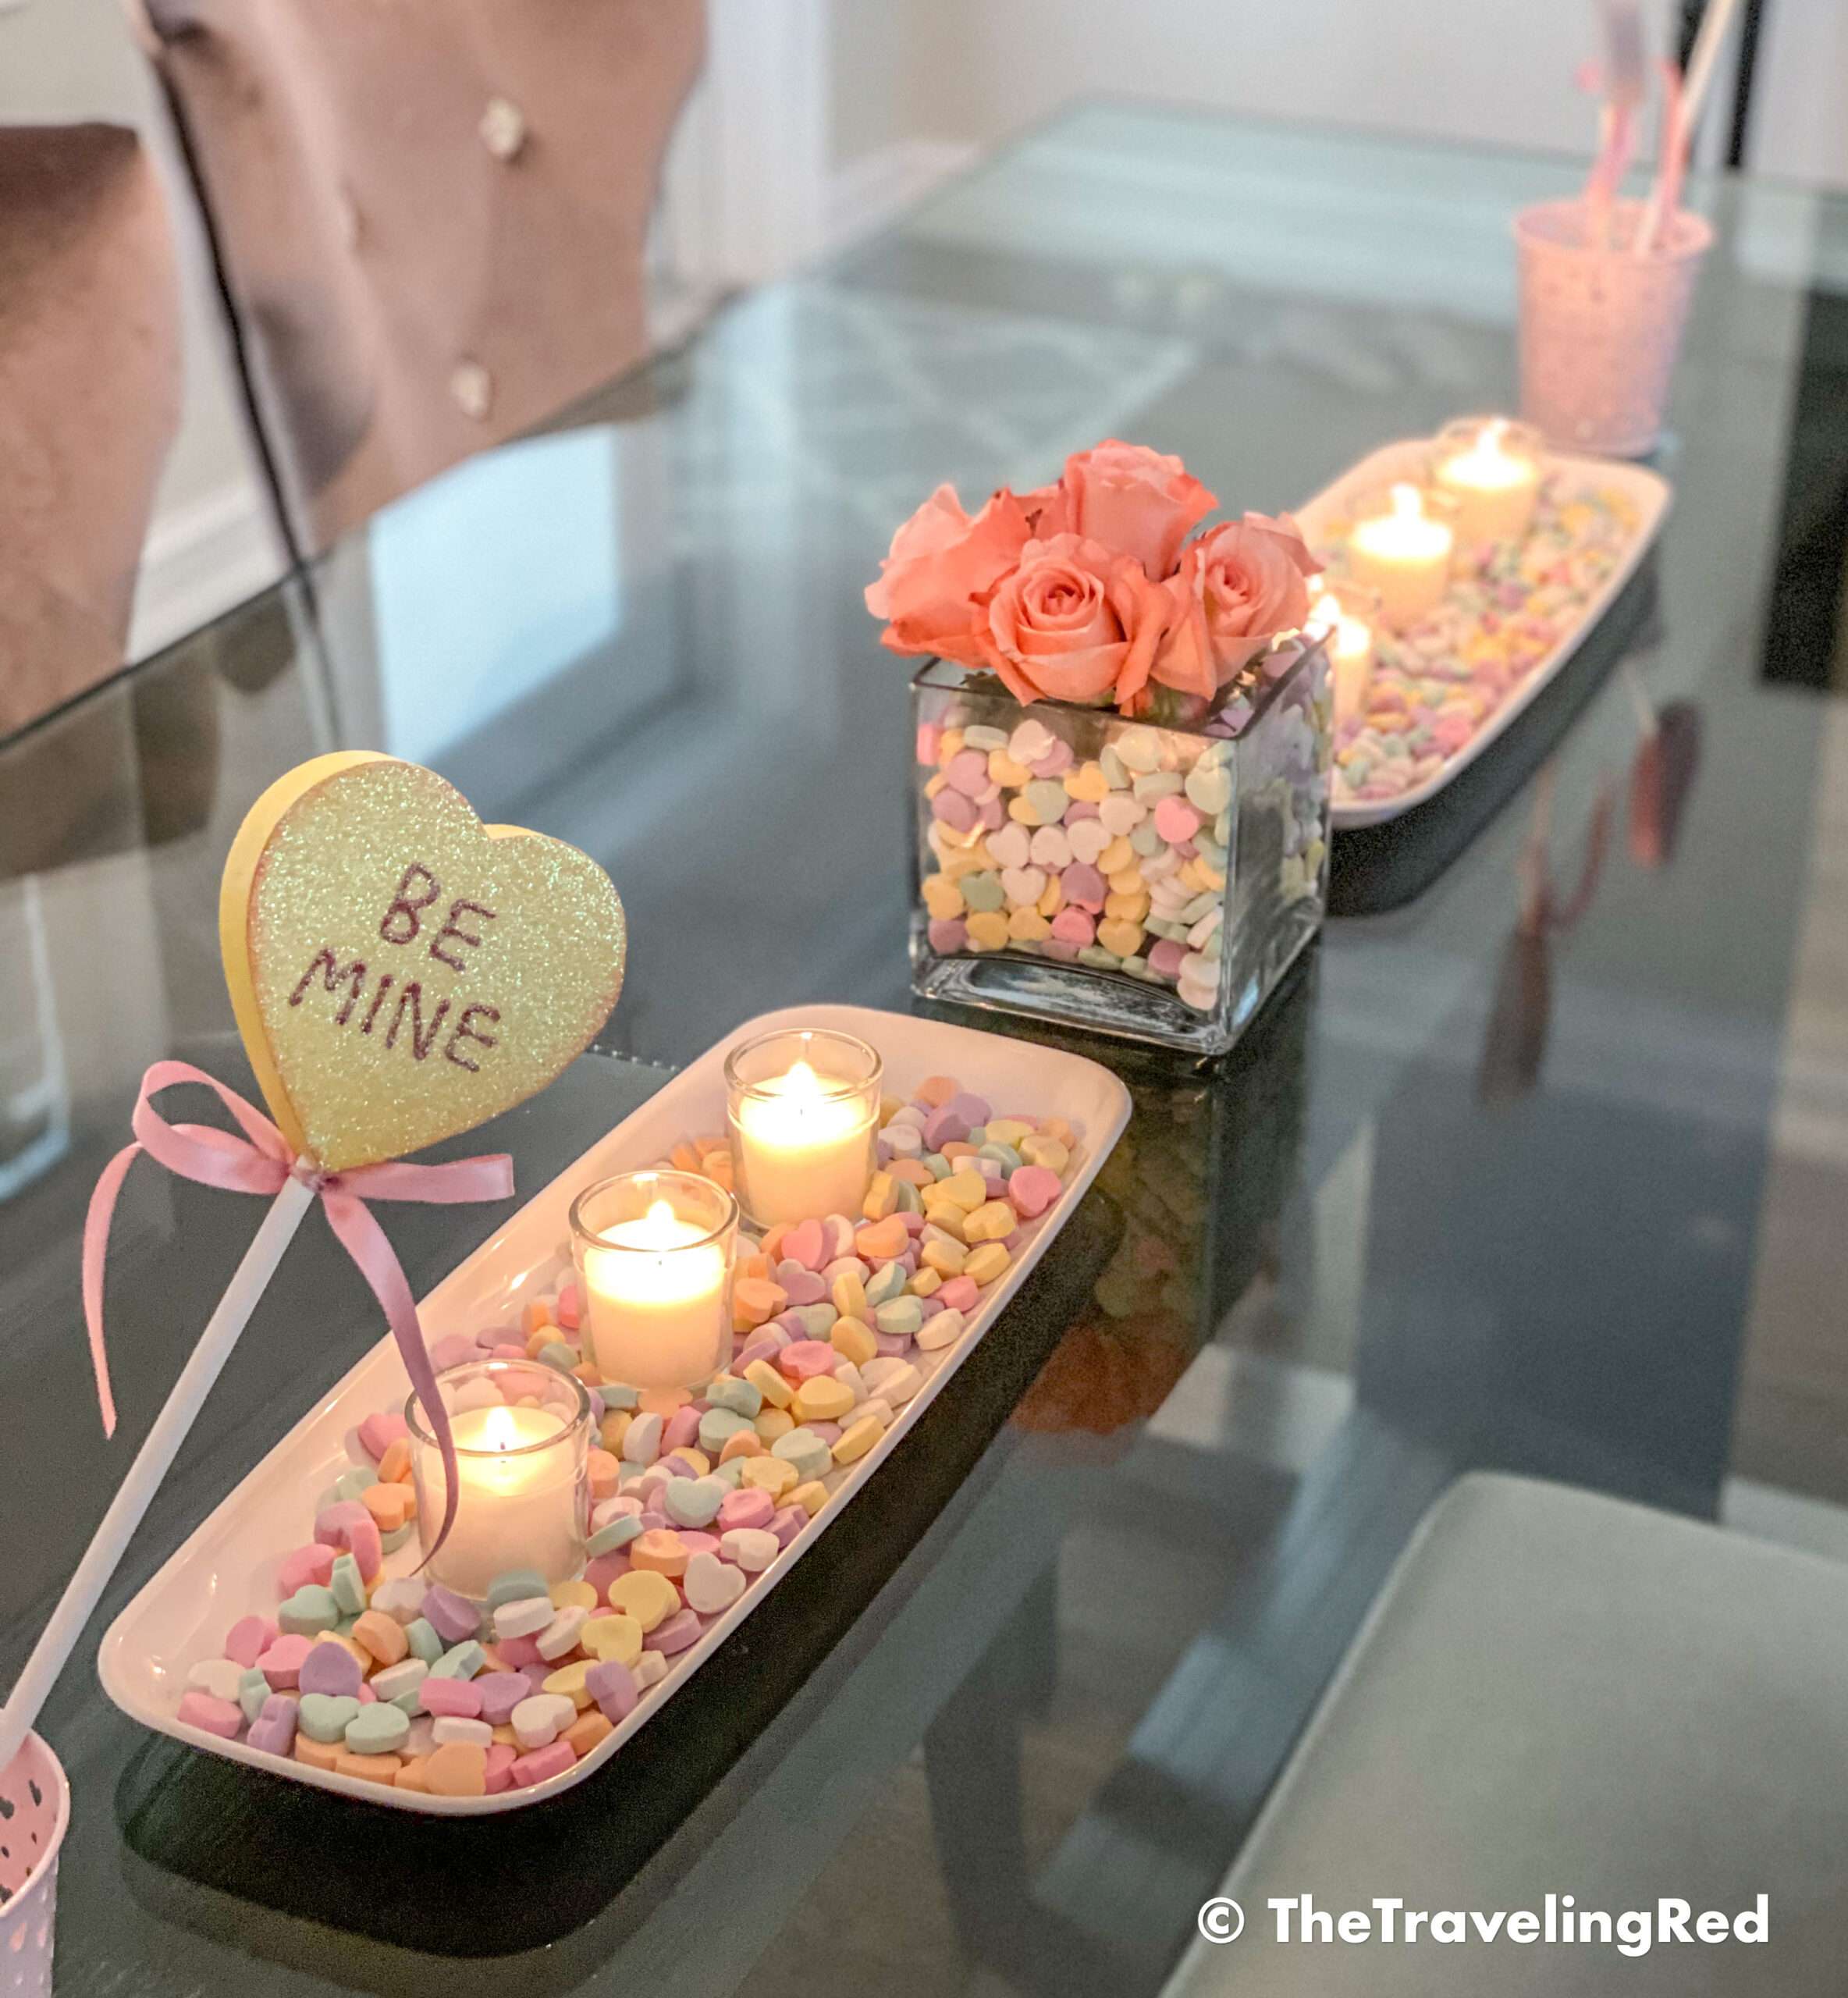 Valentine's Day Home Decor Dining Room Table Decor for a Valentines Day party using plastic trays, glass vases, sweetheart candies, votive candles & fresh roses - #valentinesday #valentinesdaydecor #homedecor #tabledecor #valentinesdayhomedecor